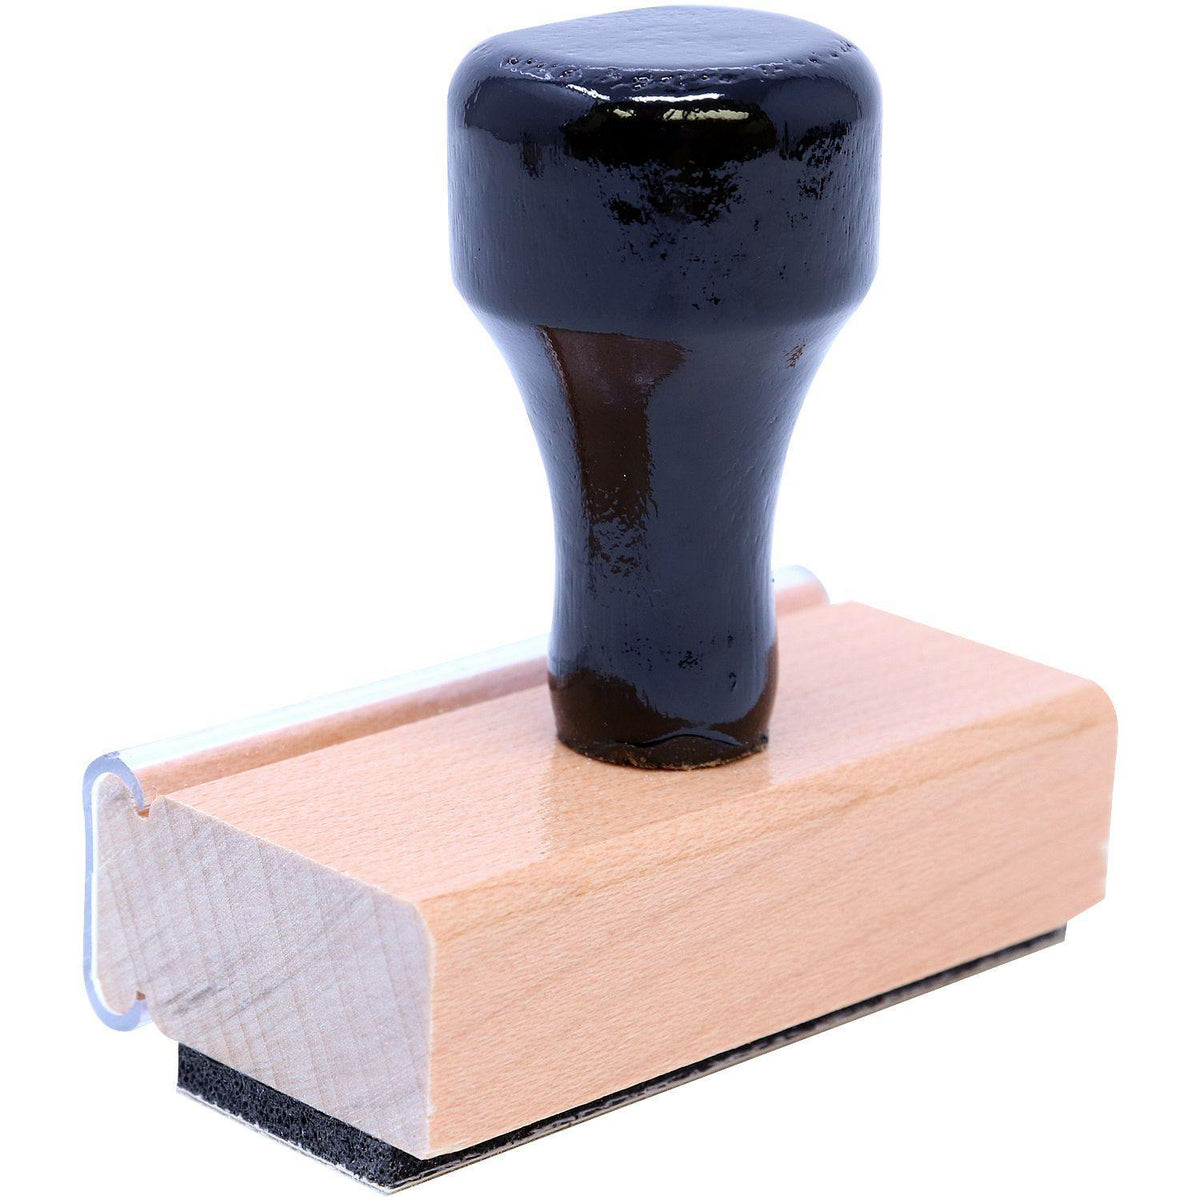 Large Void with Strikelines Rubber Stamp - Engineer Seal Stamps - Brand_Acorn, Impression Size_Large, Stamp Type_Regular Stamp, Type of Use_Office, Type of Use_Professional